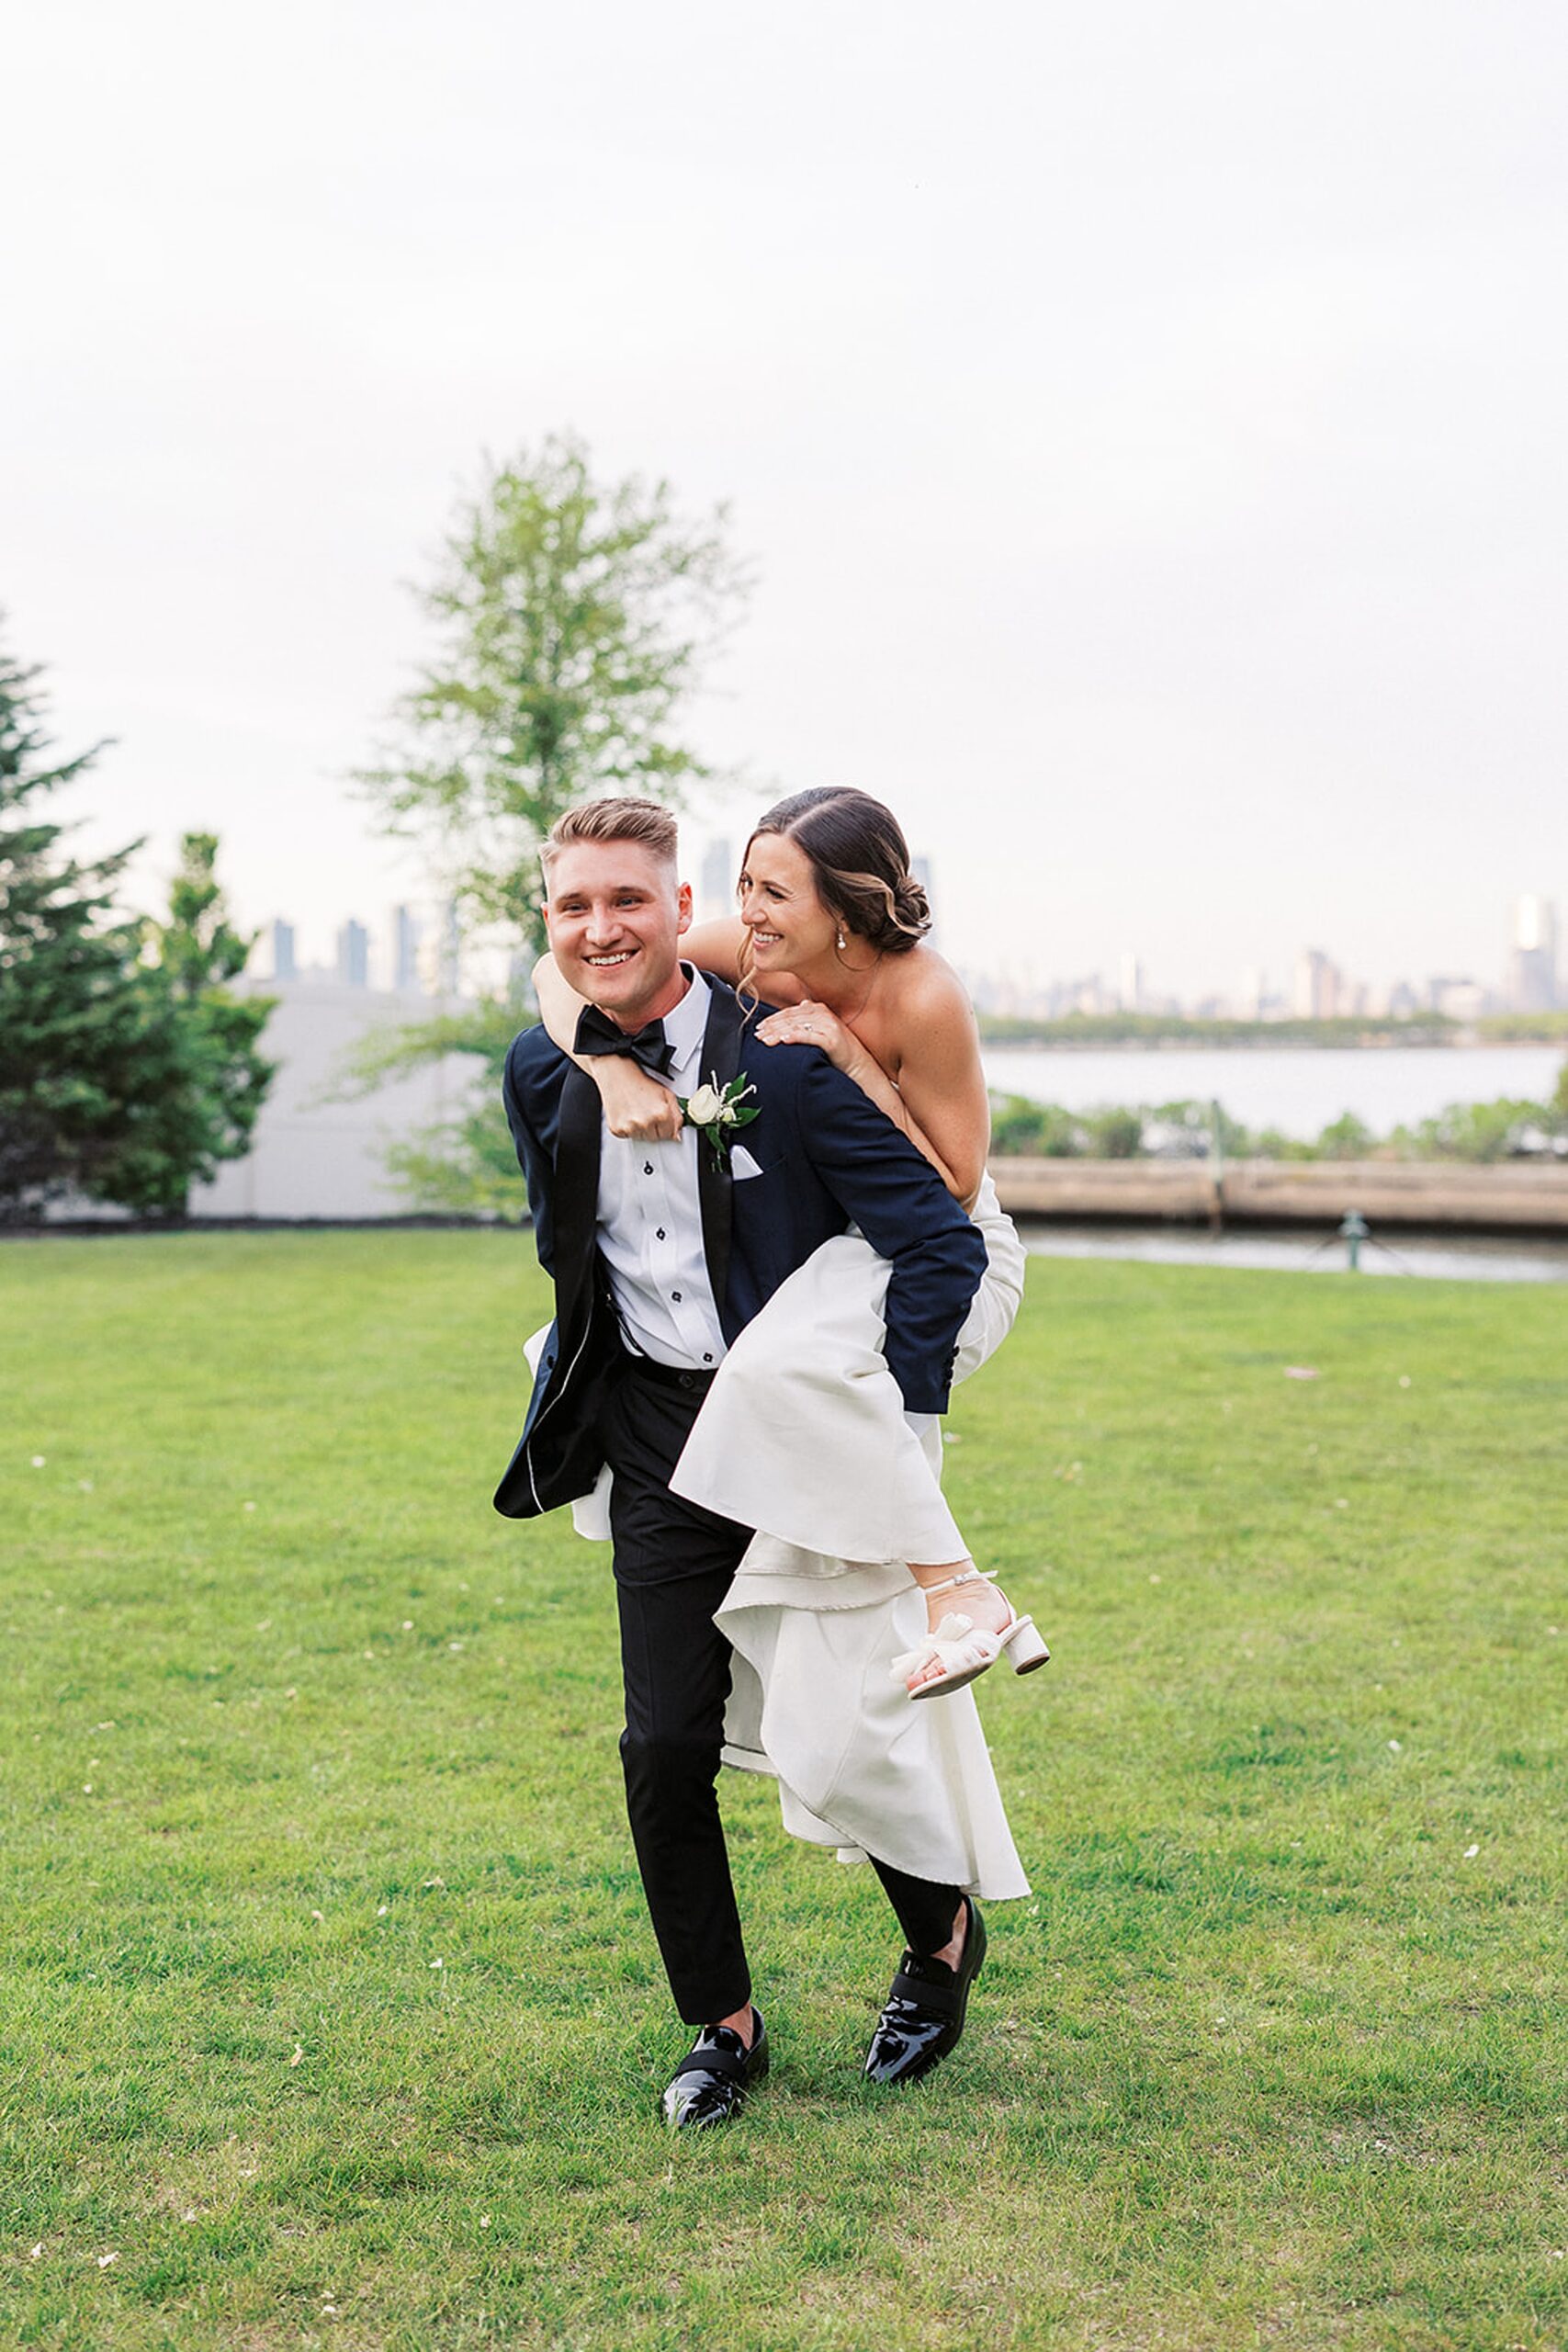 A bride hops on her husbands back while they walk through a grassy field